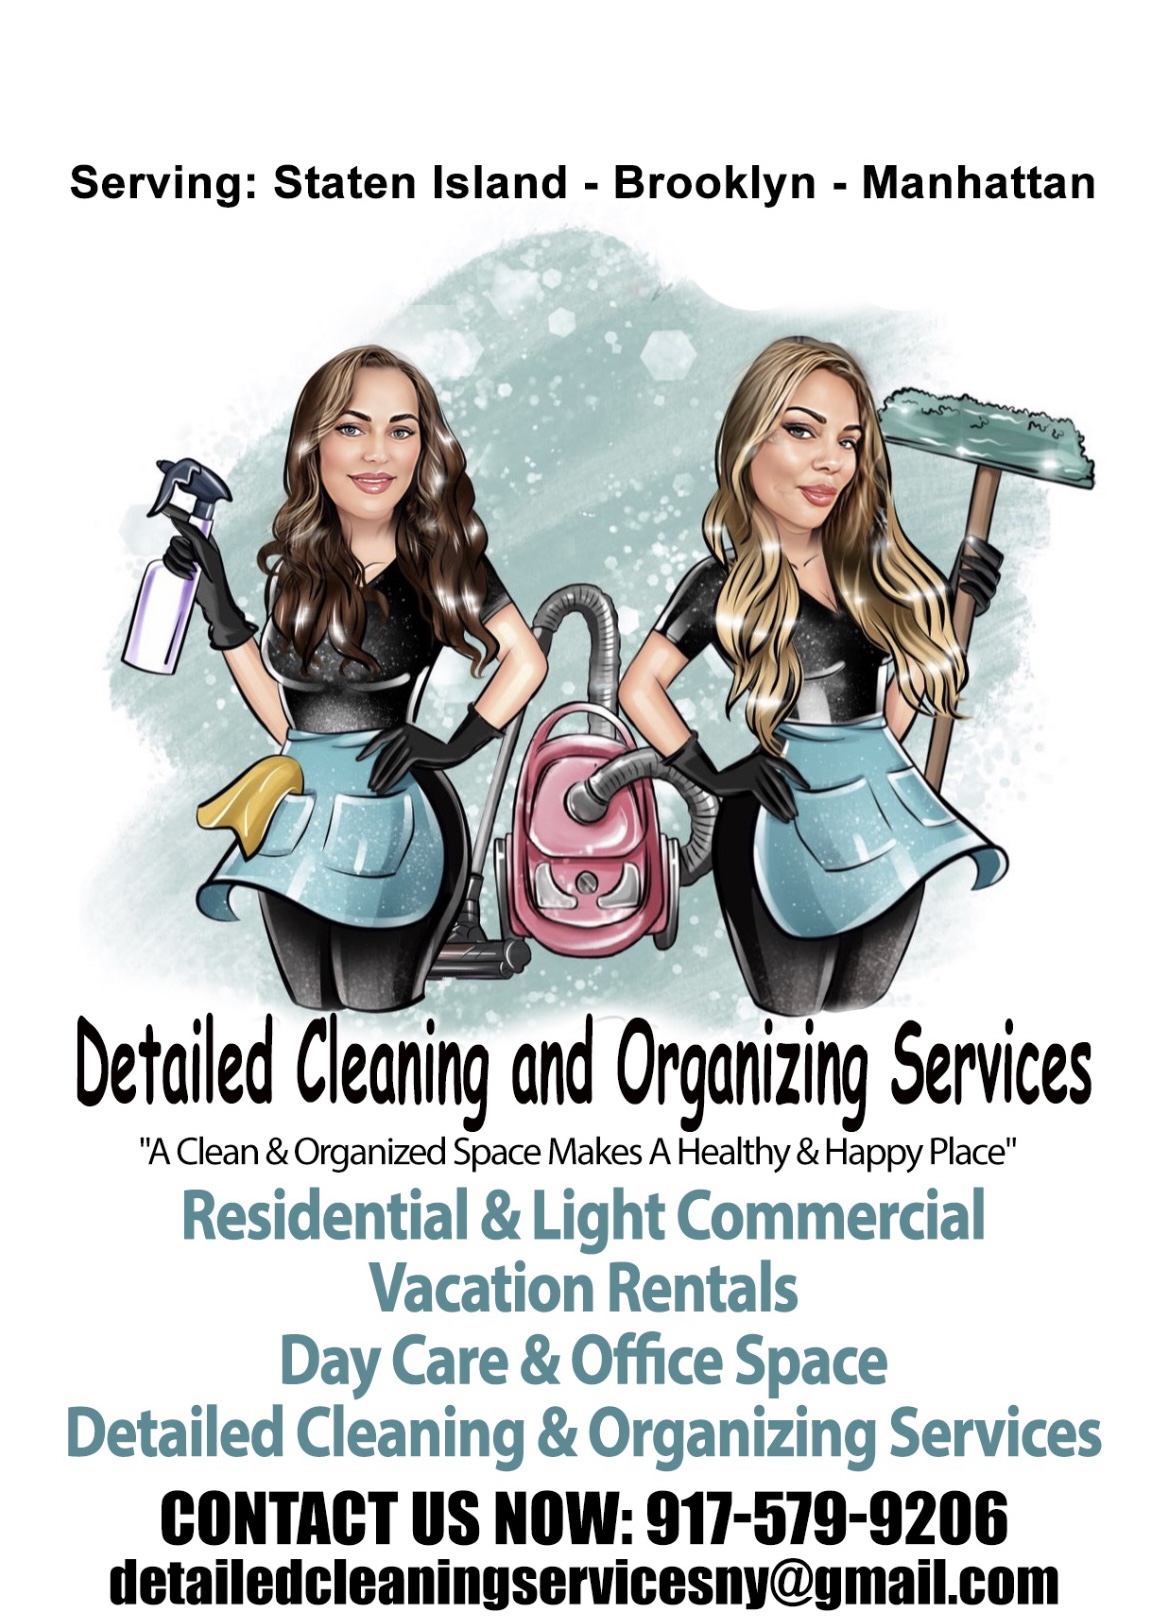 Detailed Cleaning and Organizing Services Logo